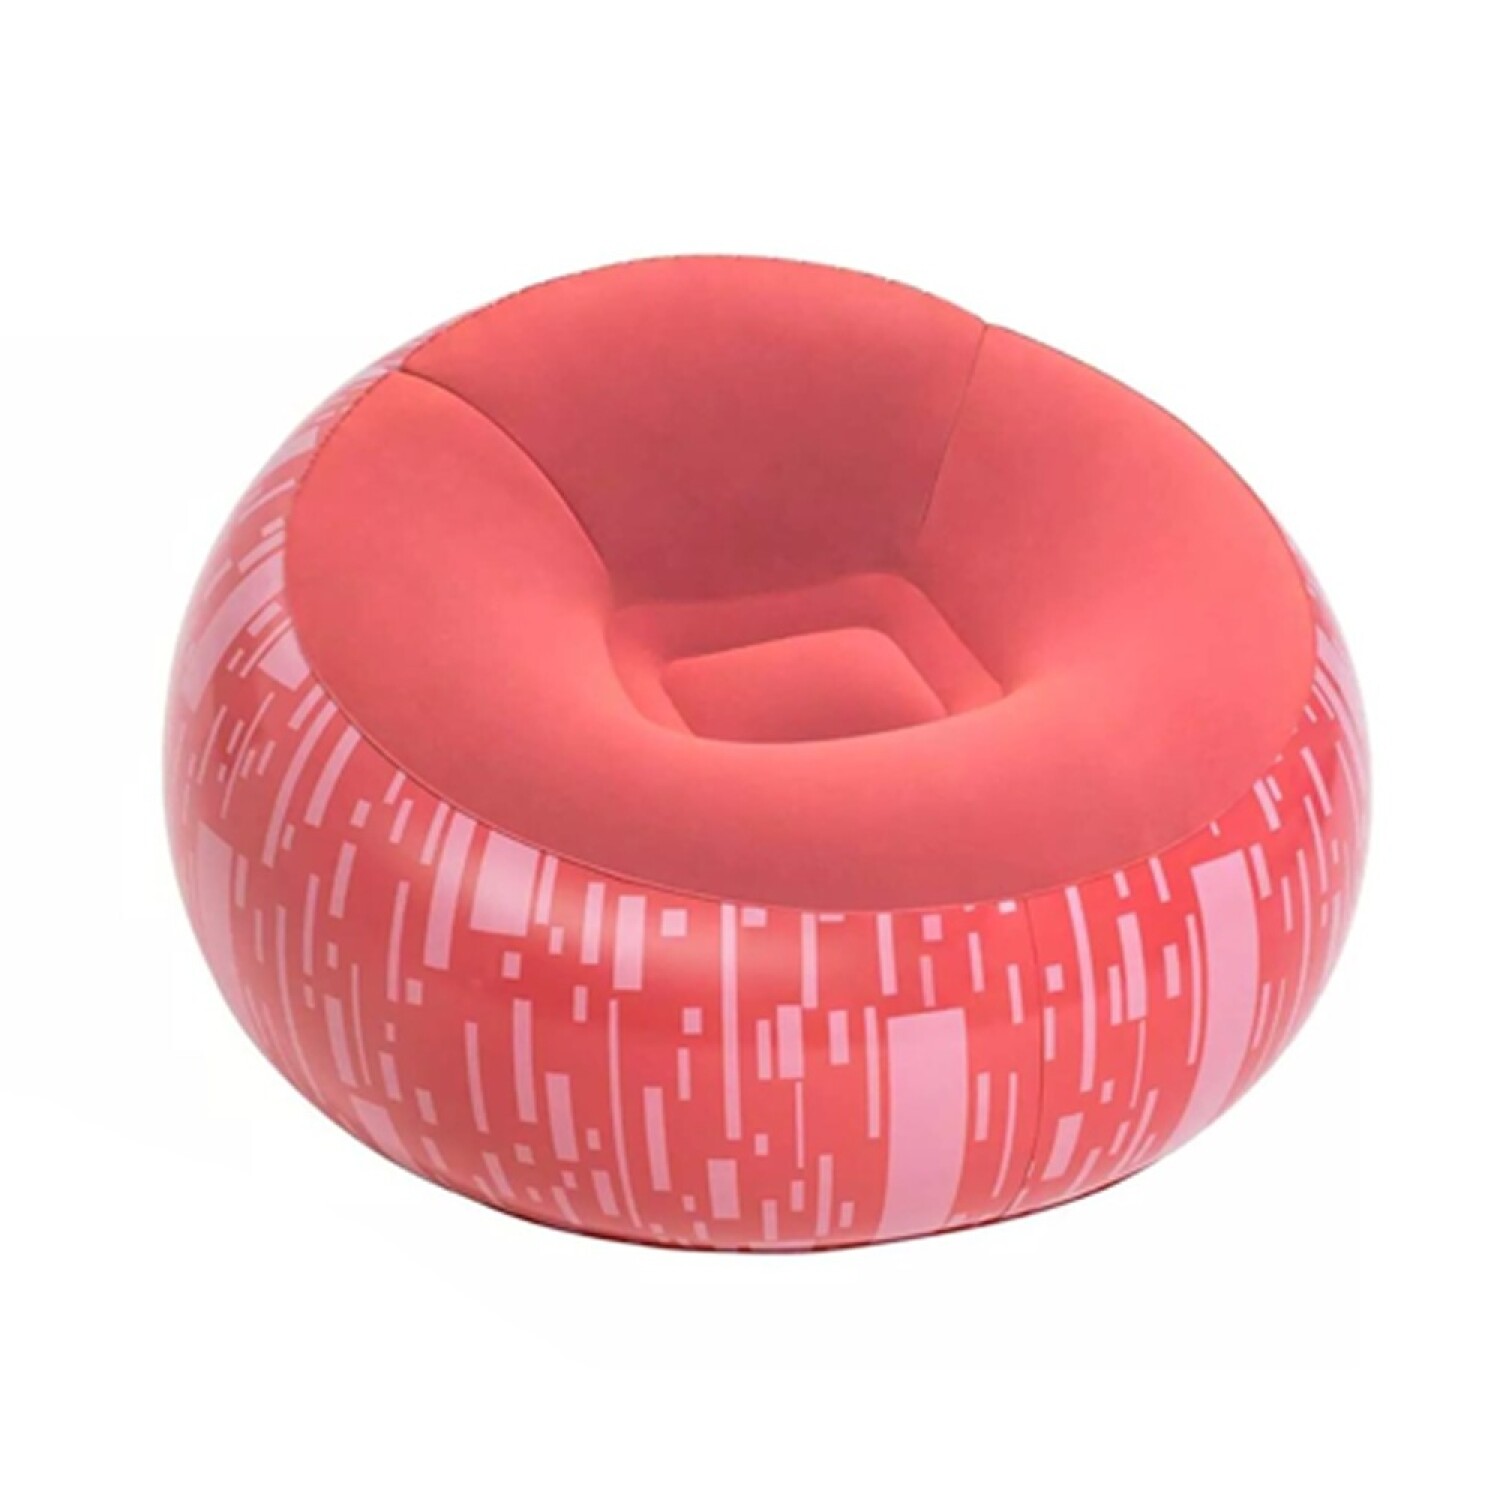 PROMOCIÓN PUFF INFLABLE BESTWAY 120 x 120 x 66 CM 75052